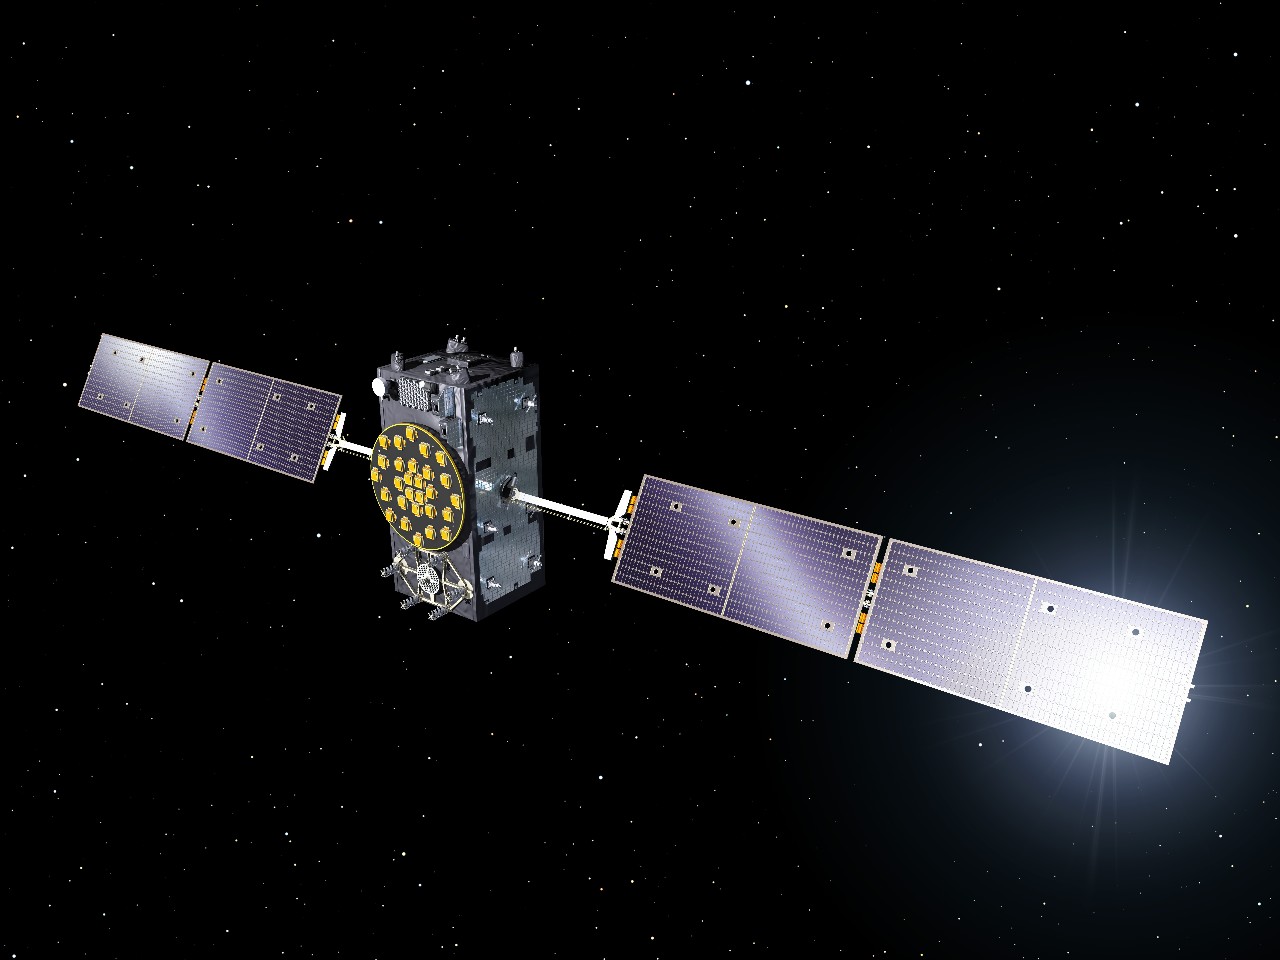 Europe's Galileo system enters initial service